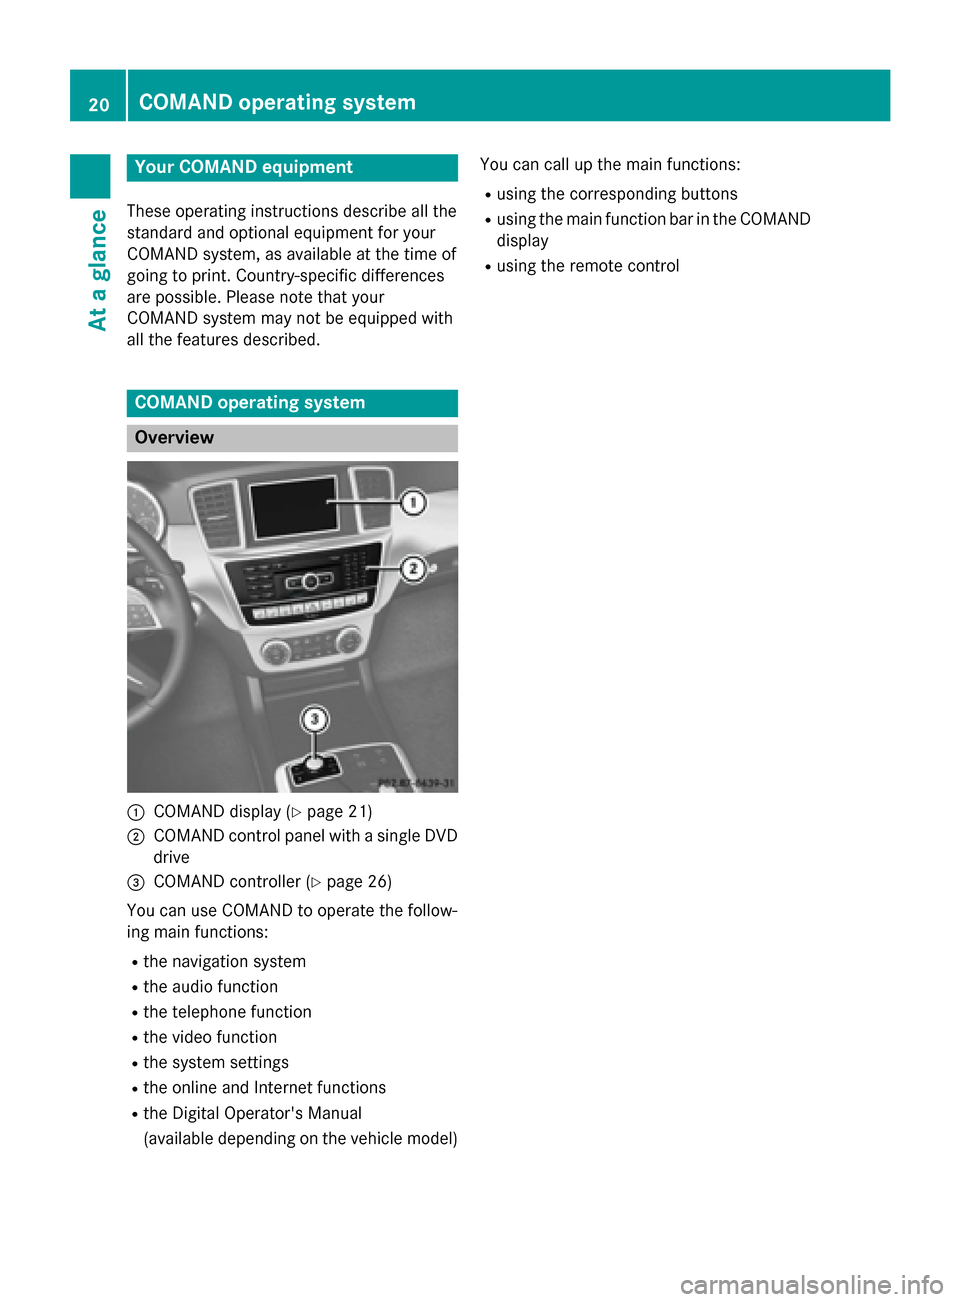 MERCEDES-BENZ GLK-Class 2015 X204 Comand Manual Your COMAND equipment
These operating instructions describe all the
standard and optional equipment for your
COMAND system, as available at the time of
going to print. Country-specific differences
are